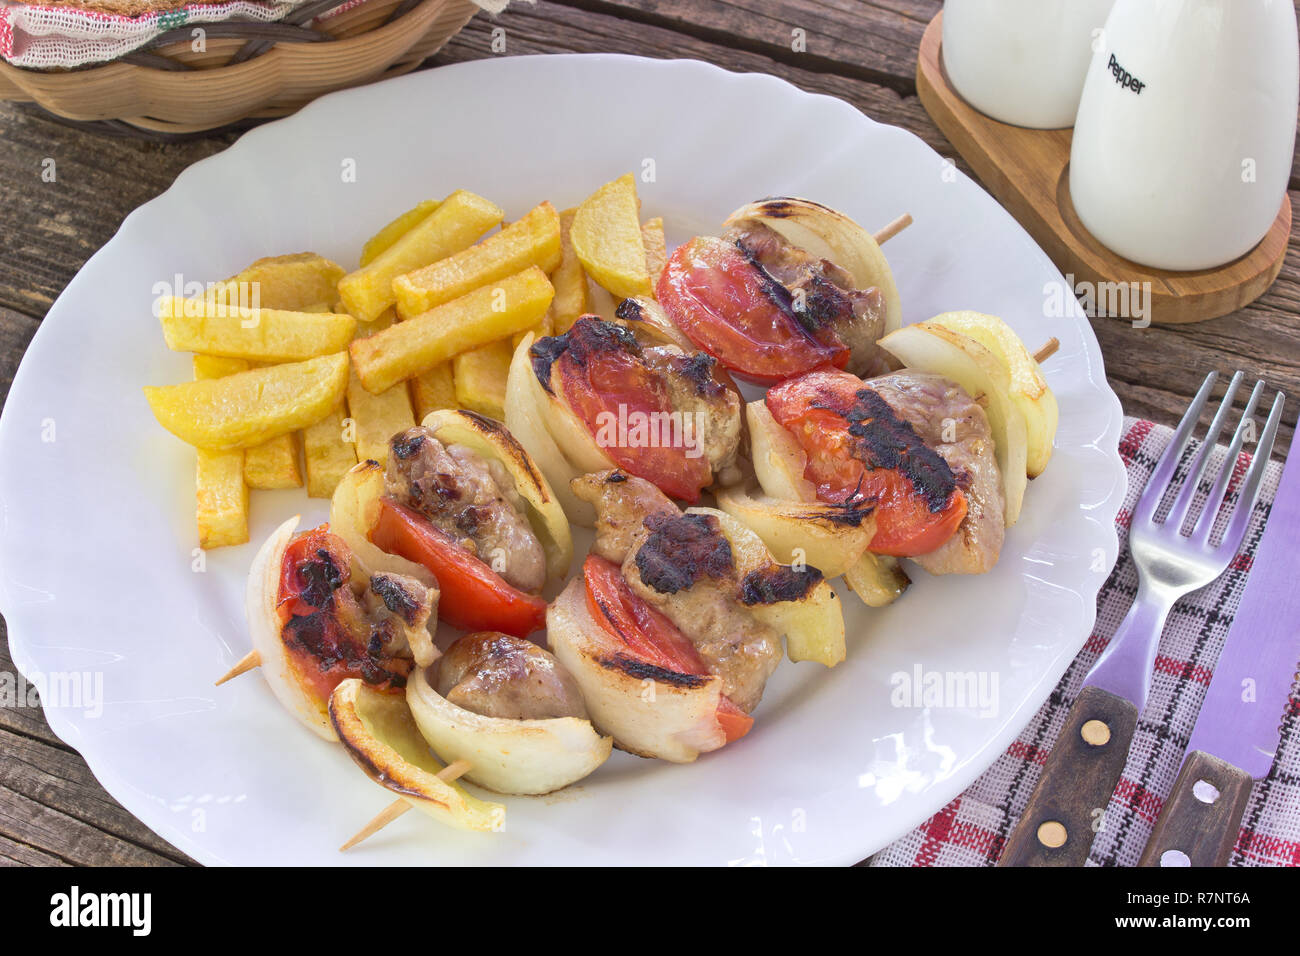 Grilled meat with vegetables on sticks in plate on table Stock Photo